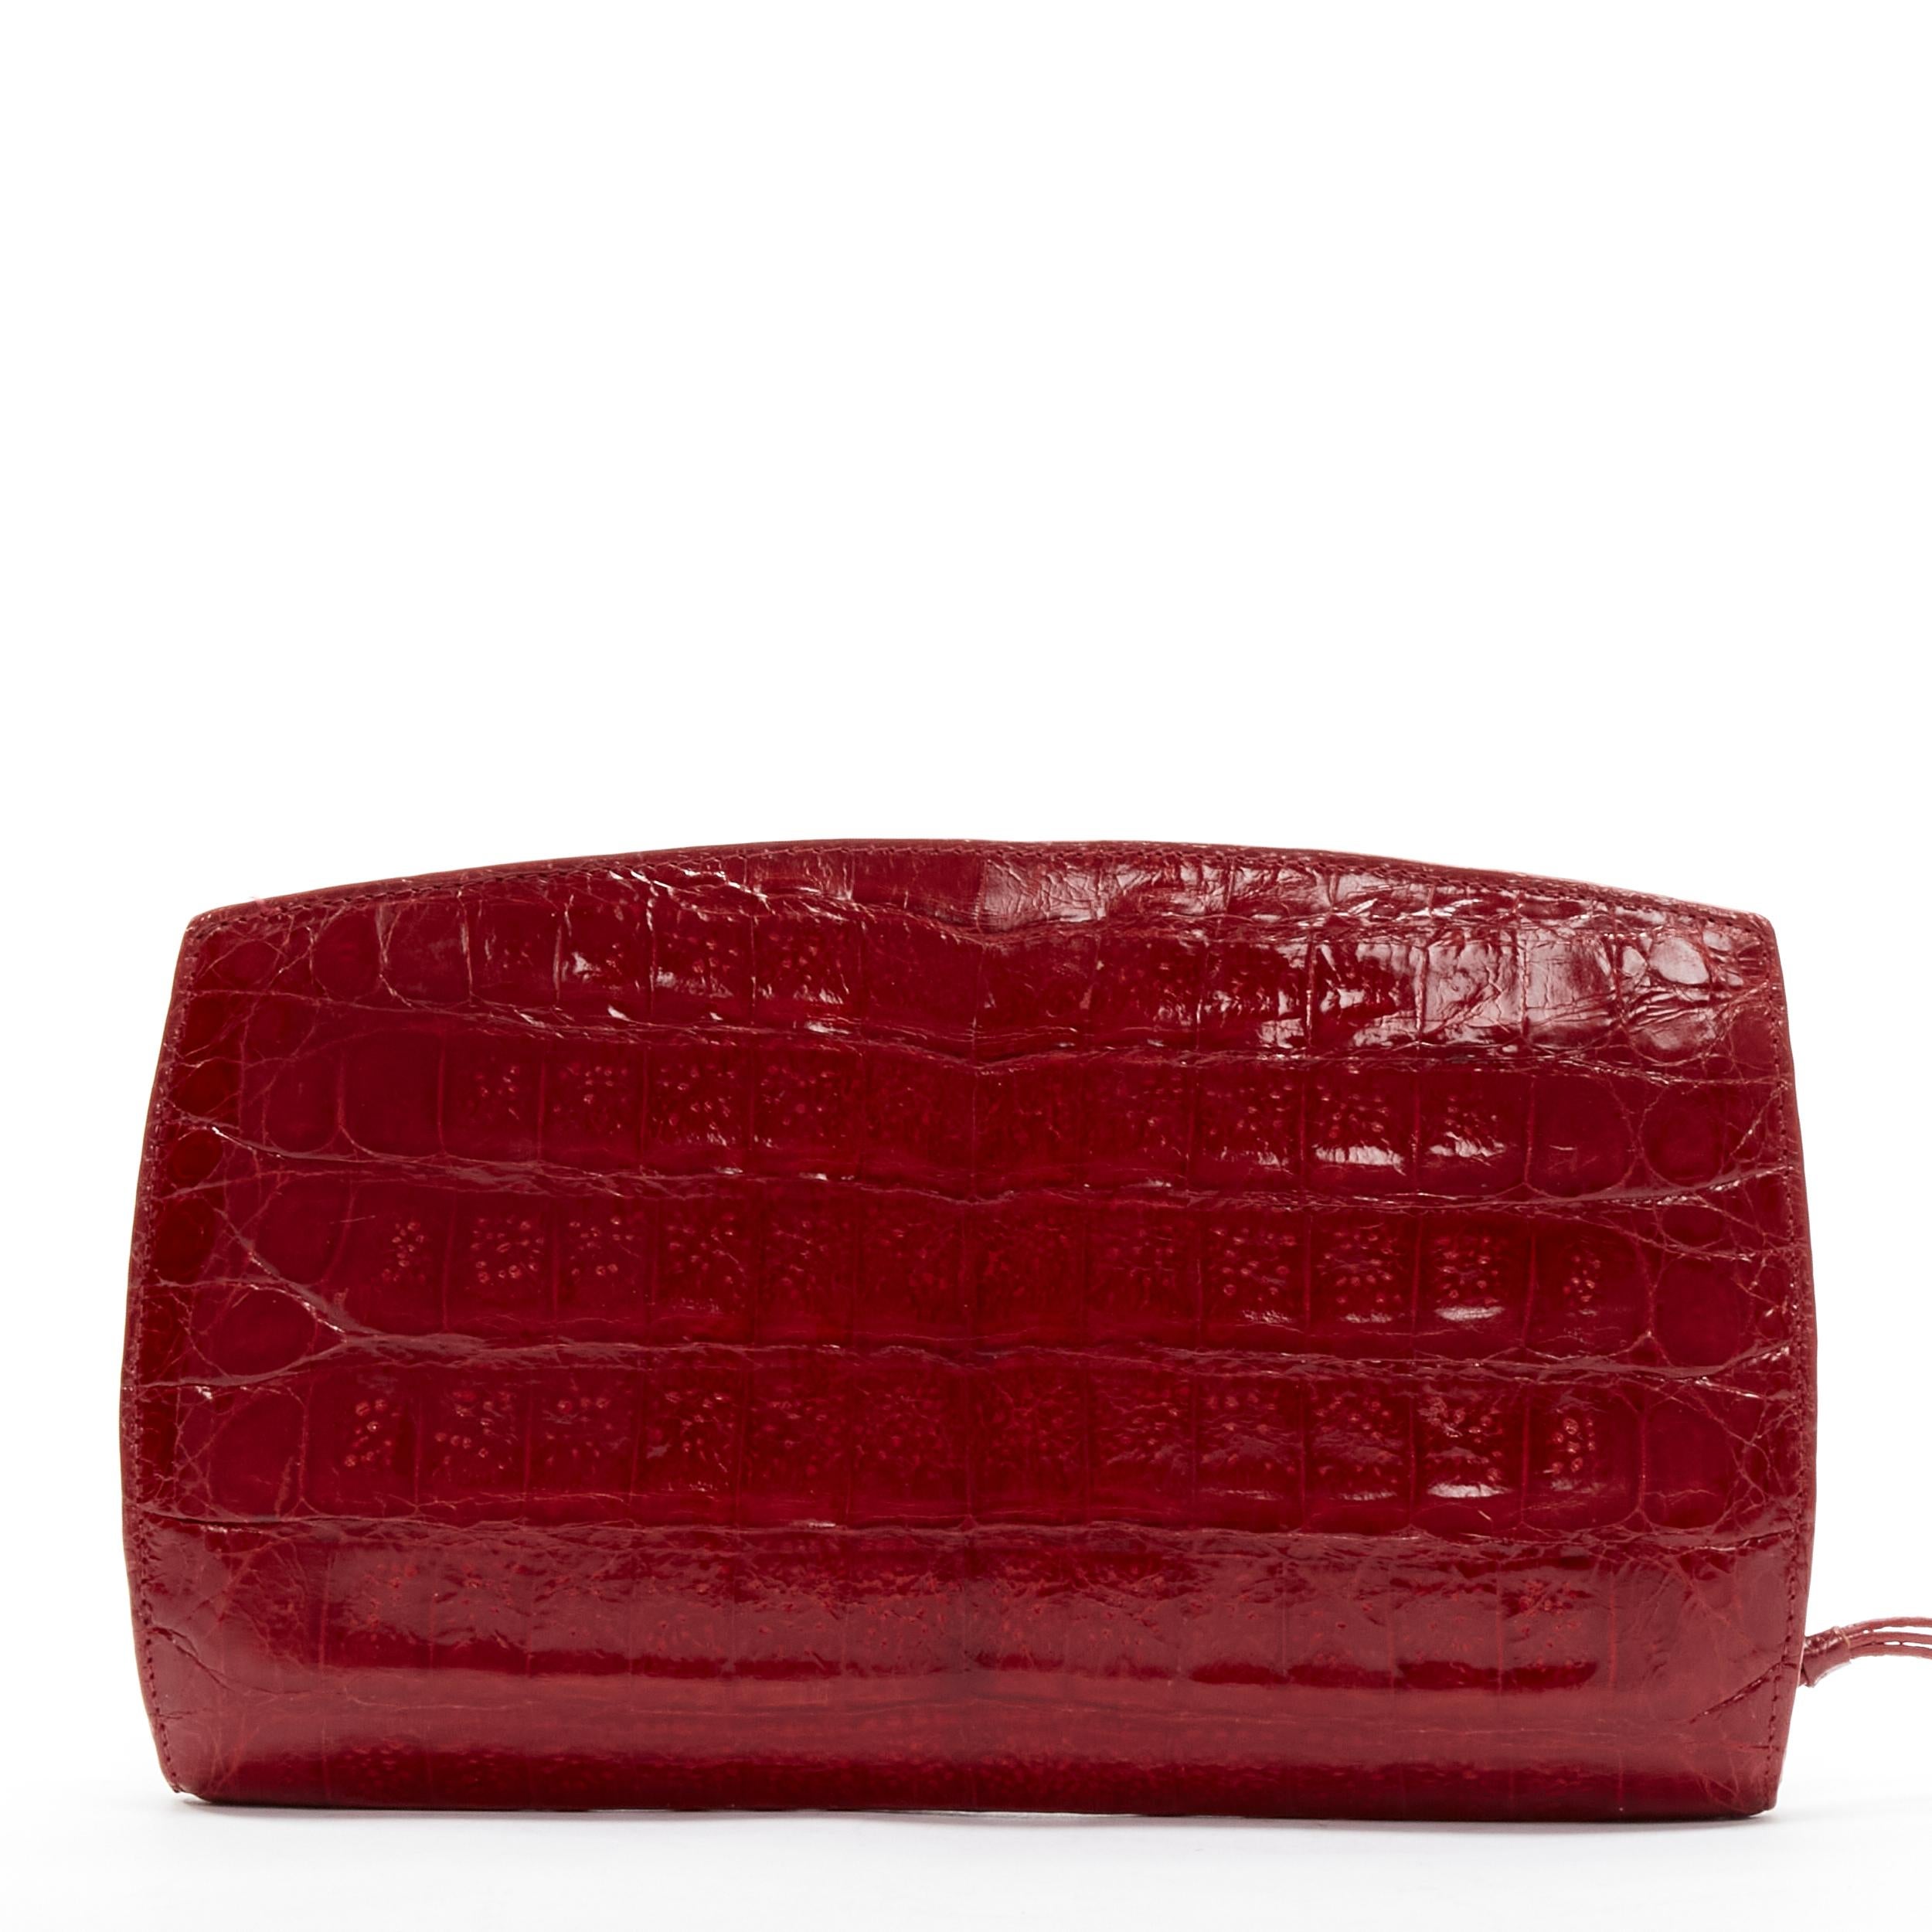 NANCY GONZALEZ red croc scaled leather luxe zip around clutch bag wallet In Excellent Condition For Sale In Hong Kong, NT